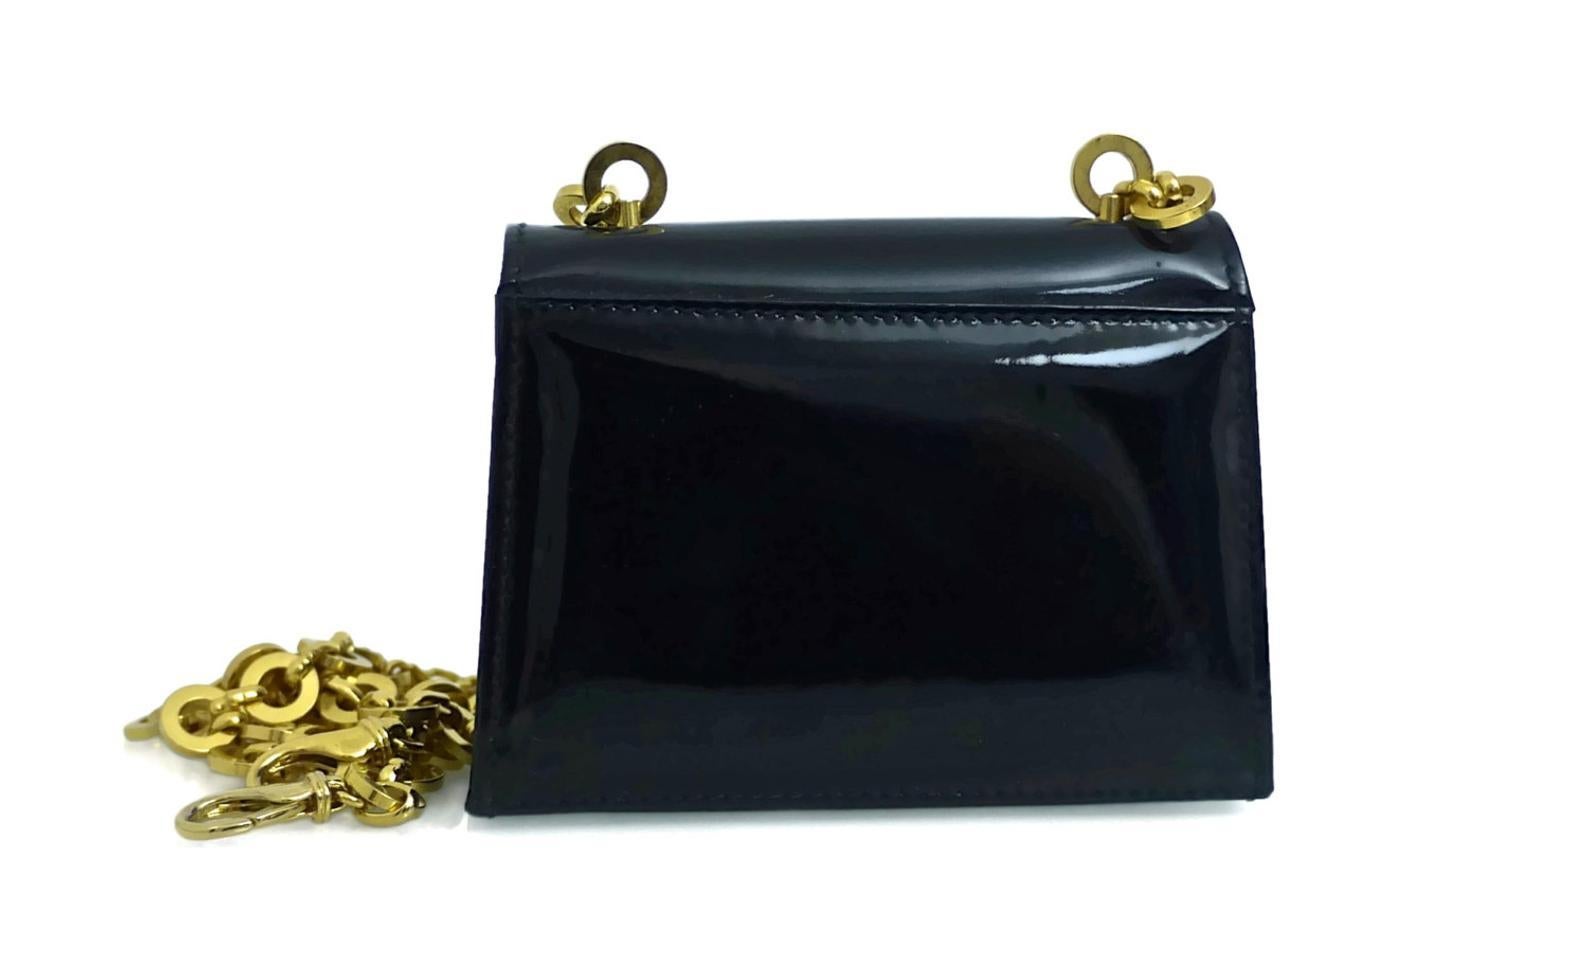 Vintage SALVATORE FERRAGAMO Patent Mini Shoulder Bag

Measurements:
Height: 3 2/8 inches
Width: 4 3/8 inches
Depth: 1 2/8 inches
Straps: 44 2/8 inches

Features:
- 100% Authentic SALVATORE FERRAGAMO.
- Black patent leather mini shoulder bag (minor